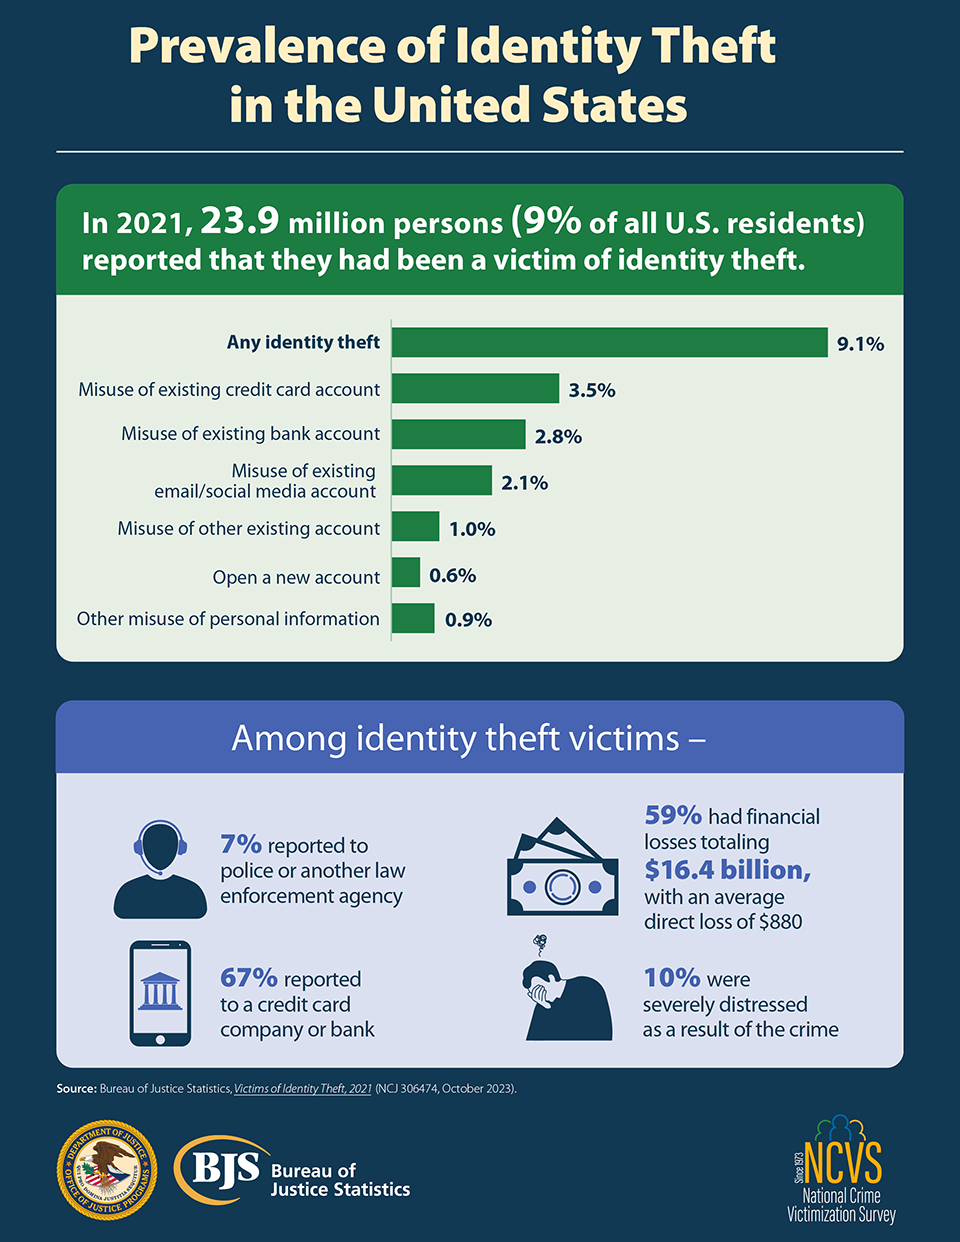 Prevalence of Identity Theft in the United States Infographic